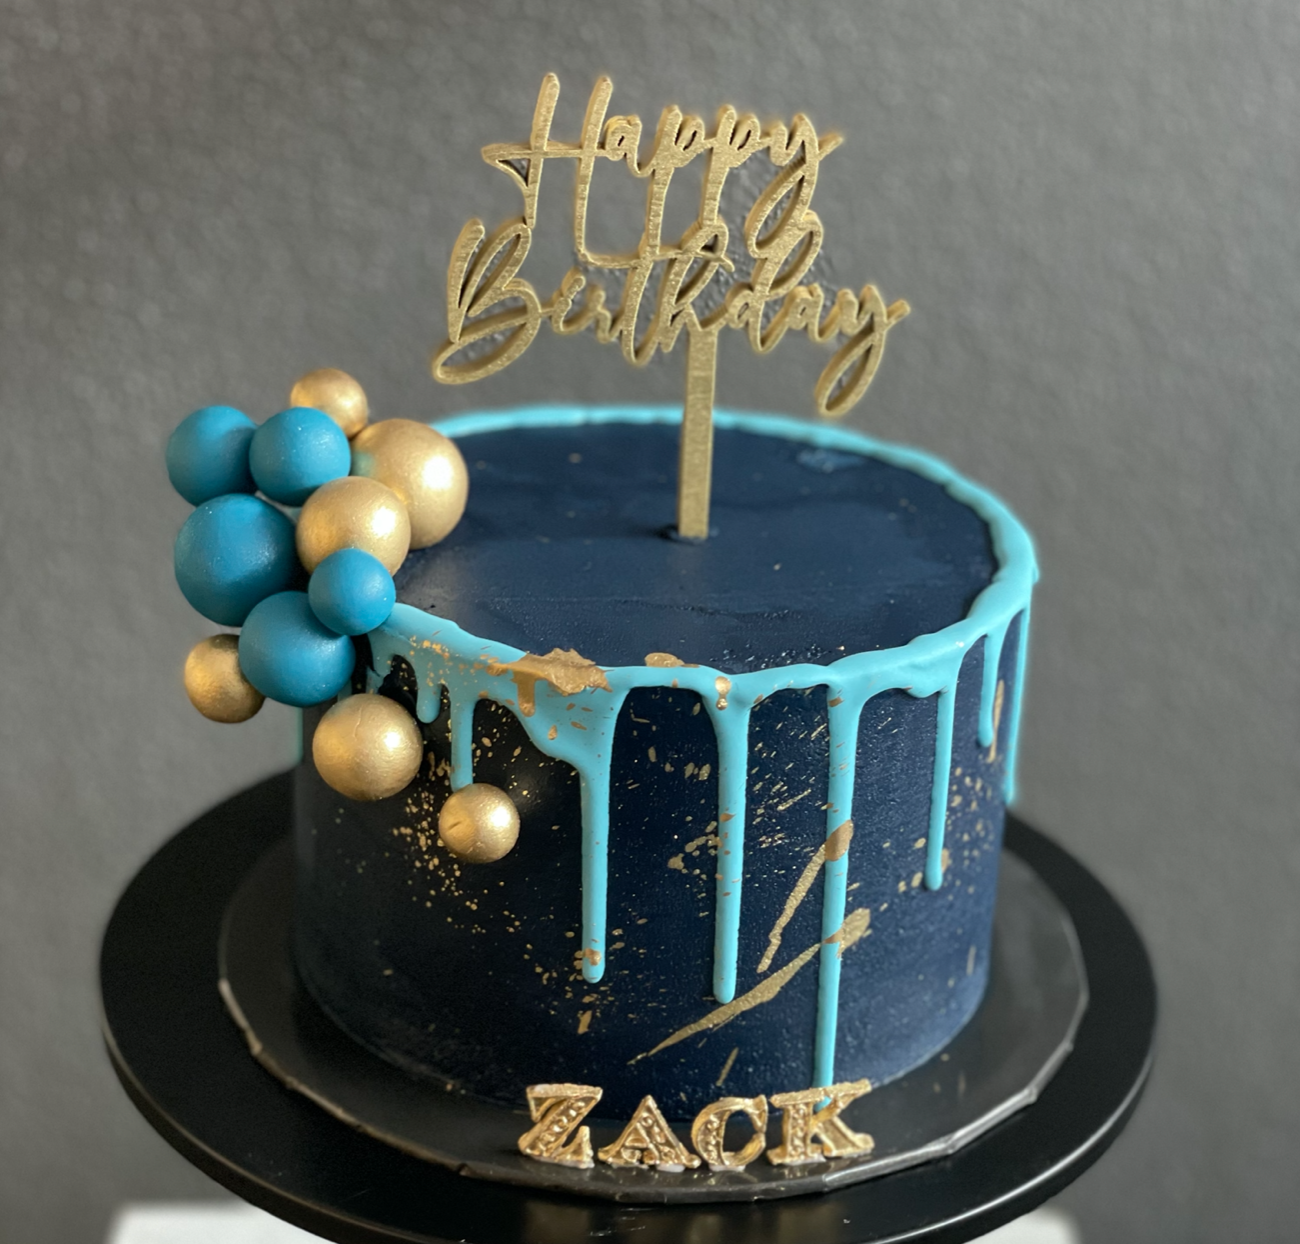 Customised Number Cakes | Home Baked Cakes – Kukkr